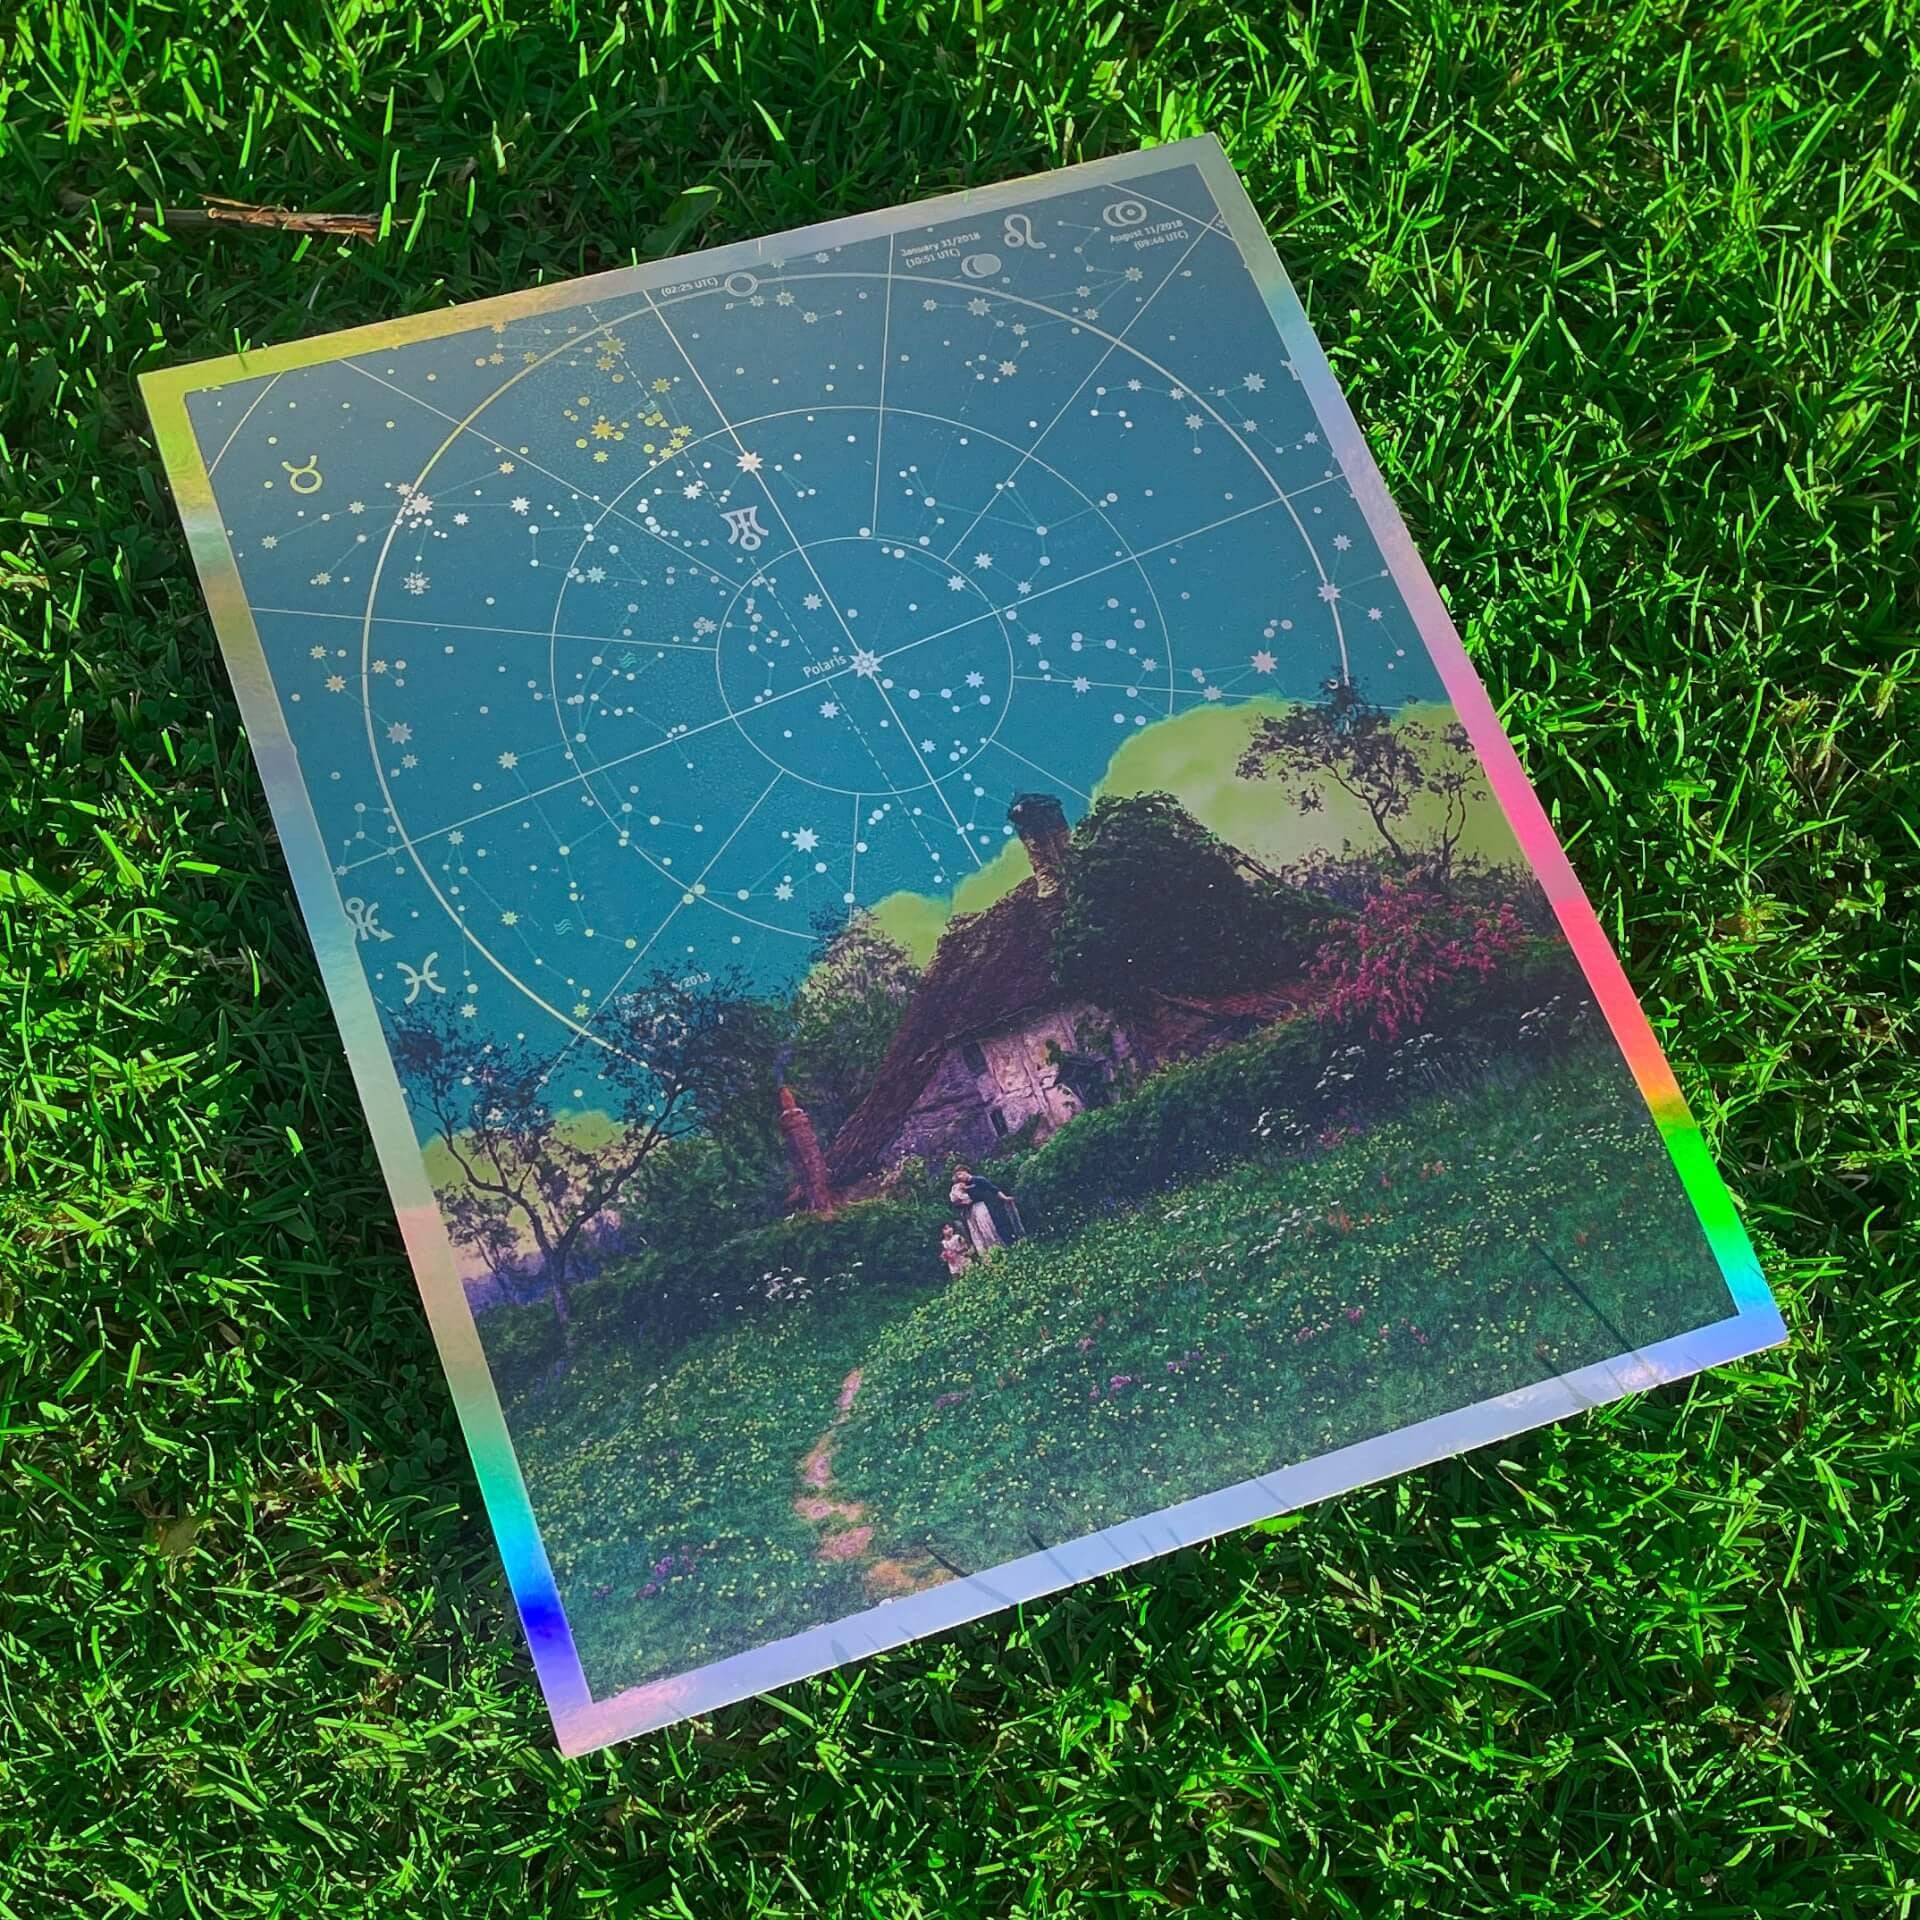 A star chart on the grass, displaying celestial bodies and their positions.